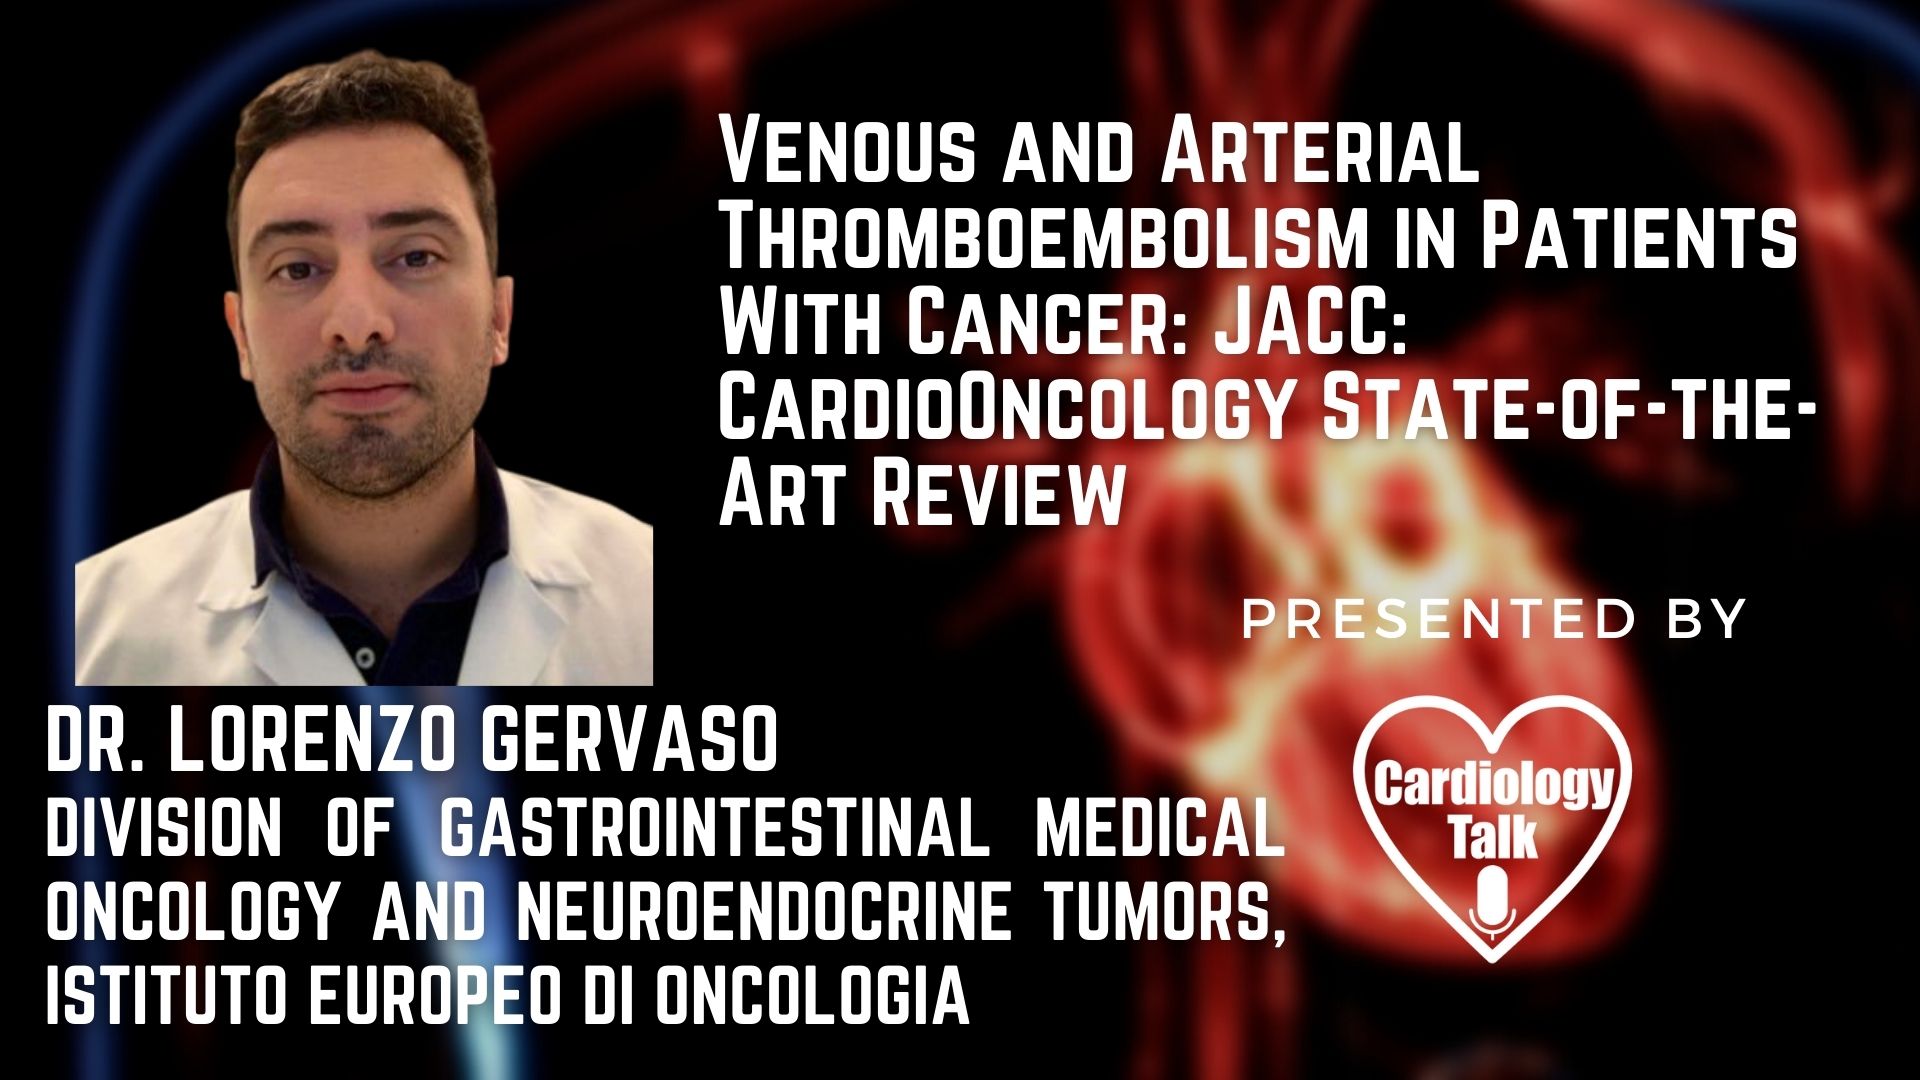 Dr. Lorenzo Gervaso- Venous and Arterial Thromboembolism in Patients With Cancer: JACC: CardioOncology State-of-the-Art Review @GervasoLorenzo #CardioOncology #Cardiology #Research #Europ...